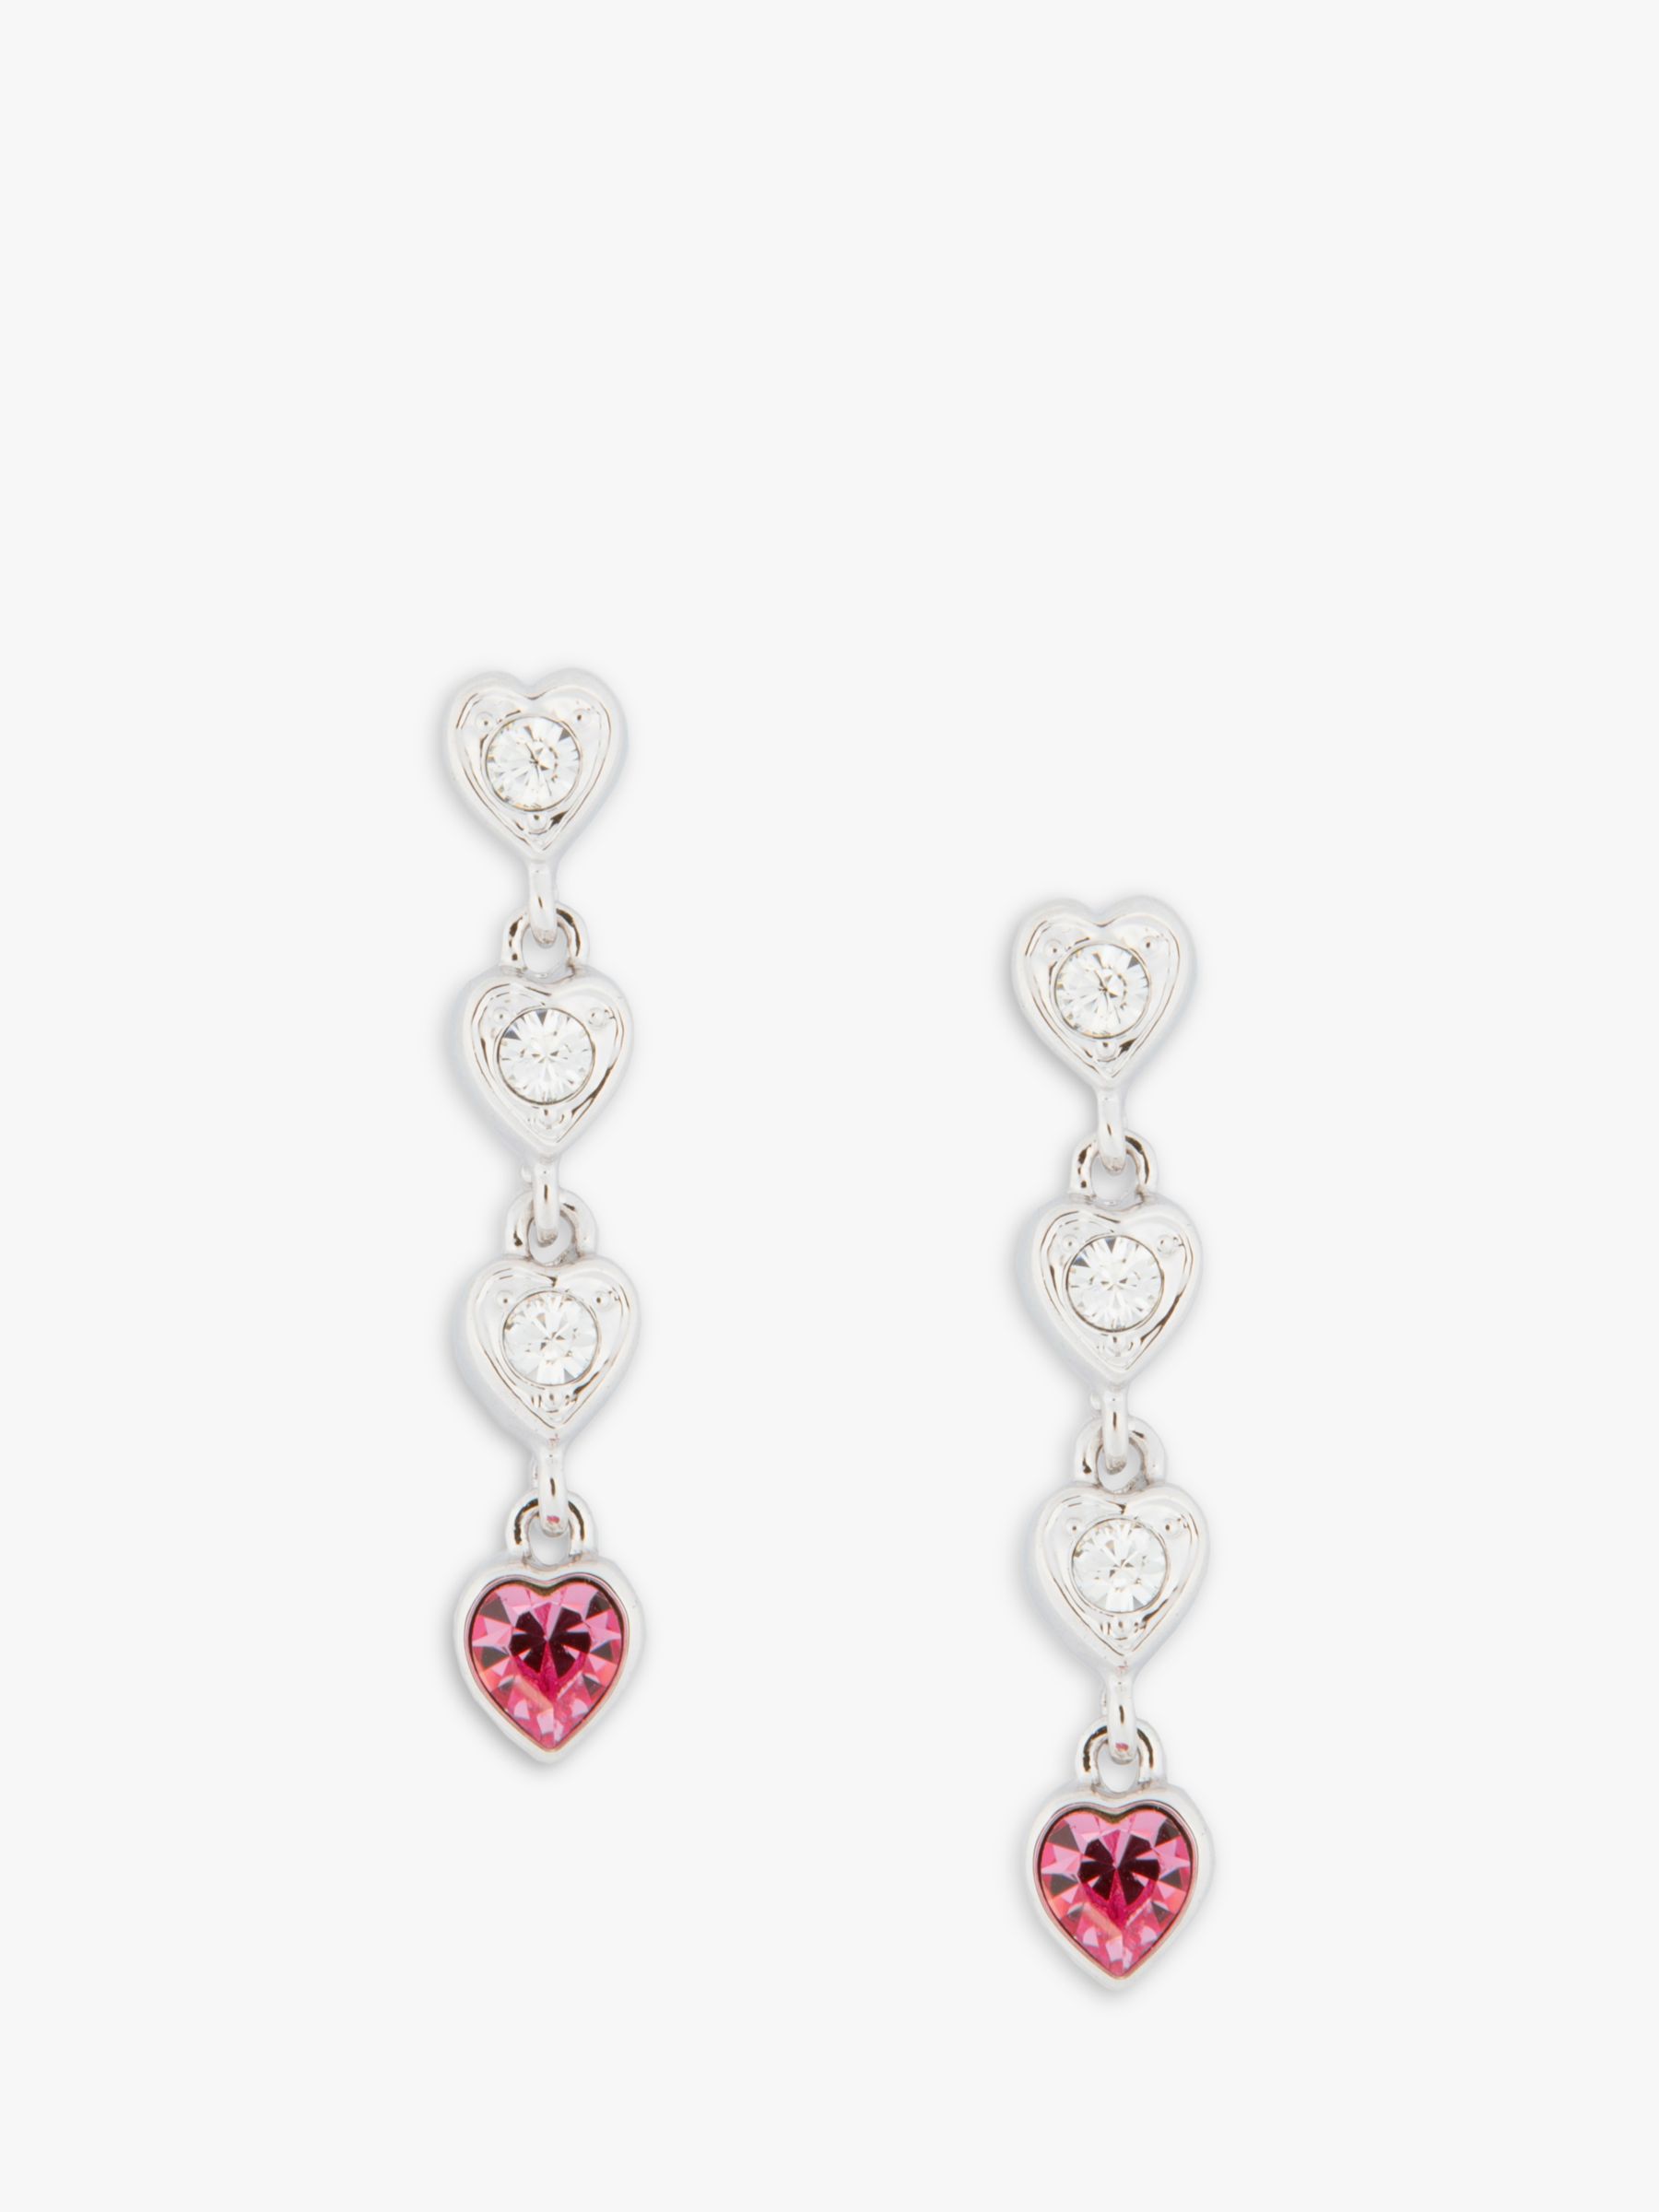 Eclectica Pre-Loved Swarovski Crystals Heart Drop Earrings, Dated Circa 1990s